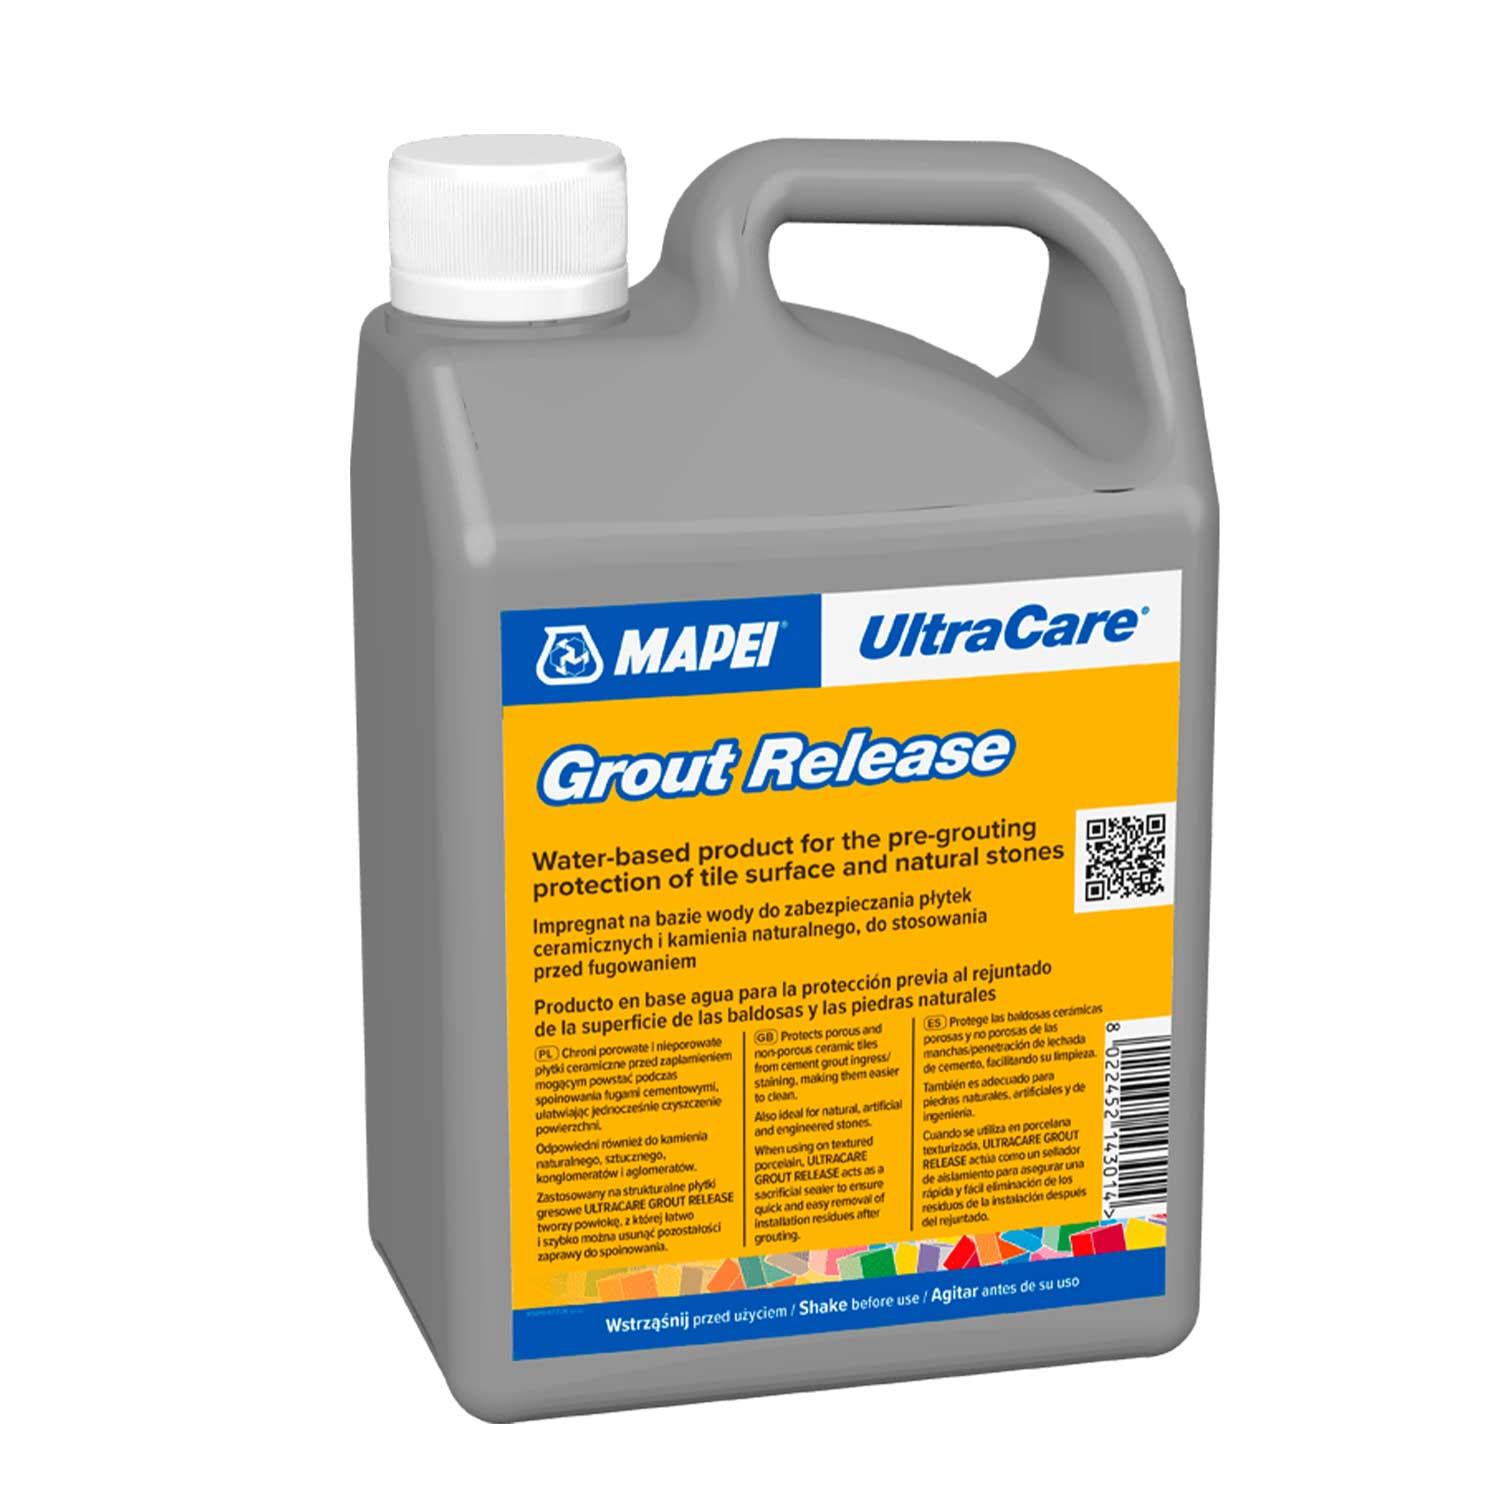 Mapei Ultracare Grout Release 1Ltr Protect Tile Surface